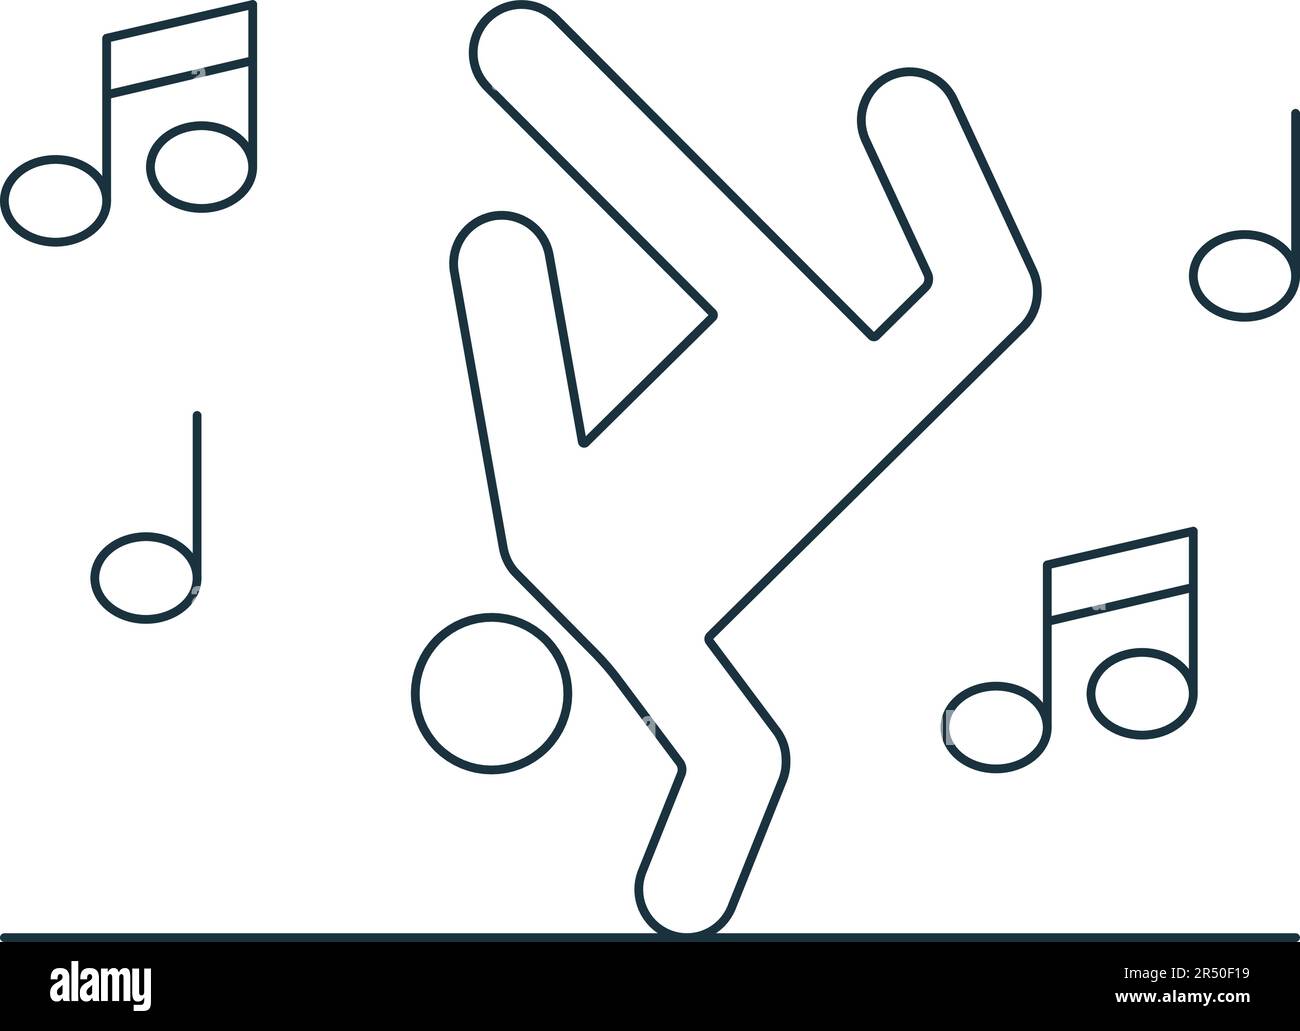 Dance icon. Monochrome simple sign from entertainment collection. Dance icon for logo, templates, web design and infographics. Stock Vector